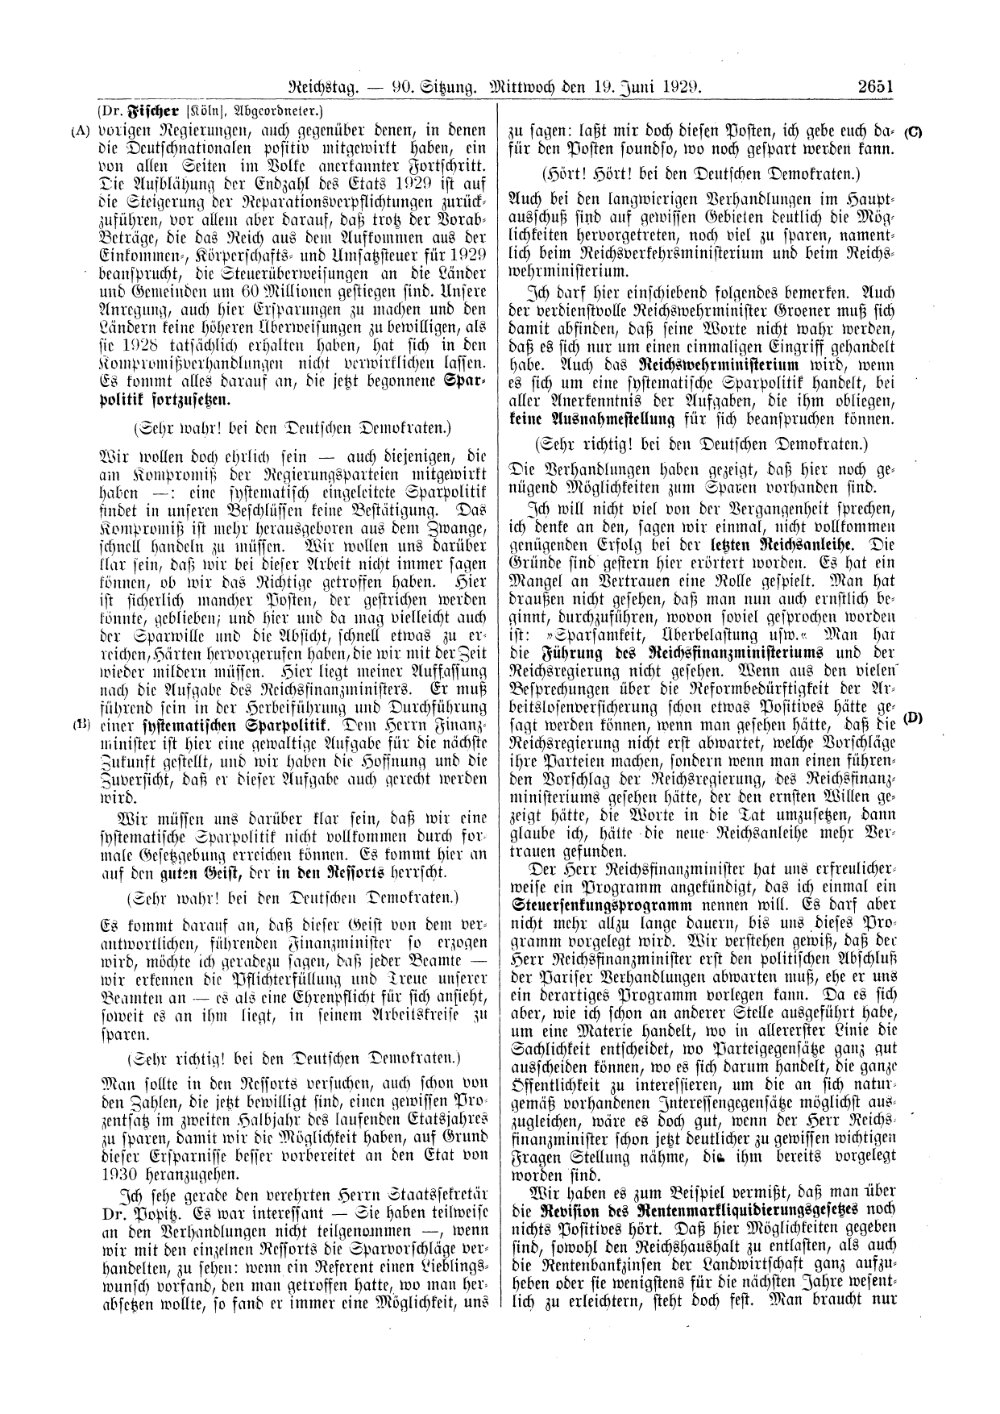 Scan of page 2651